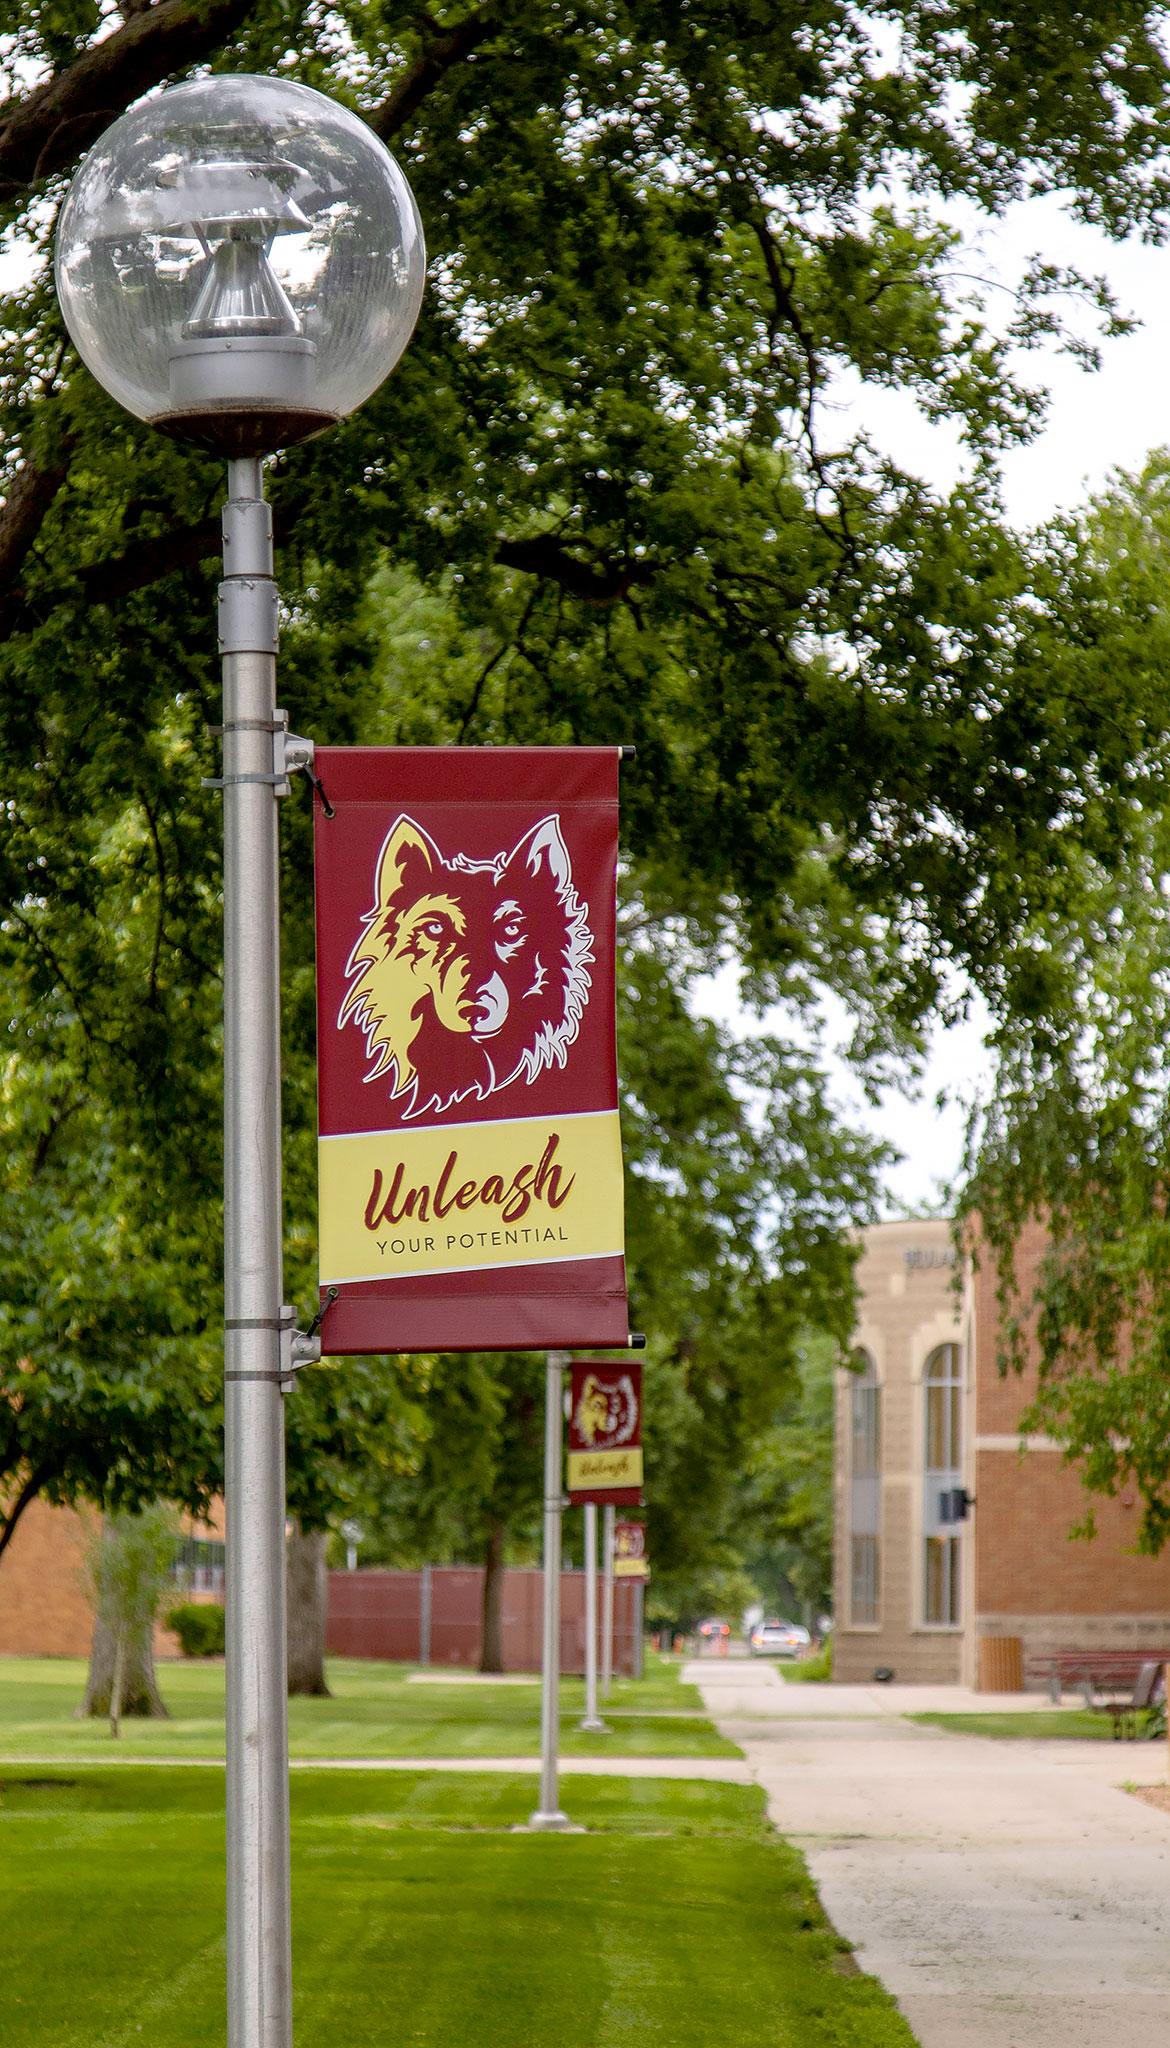 Northern State University Unleash Your Potential banner on an outdoor lamppost